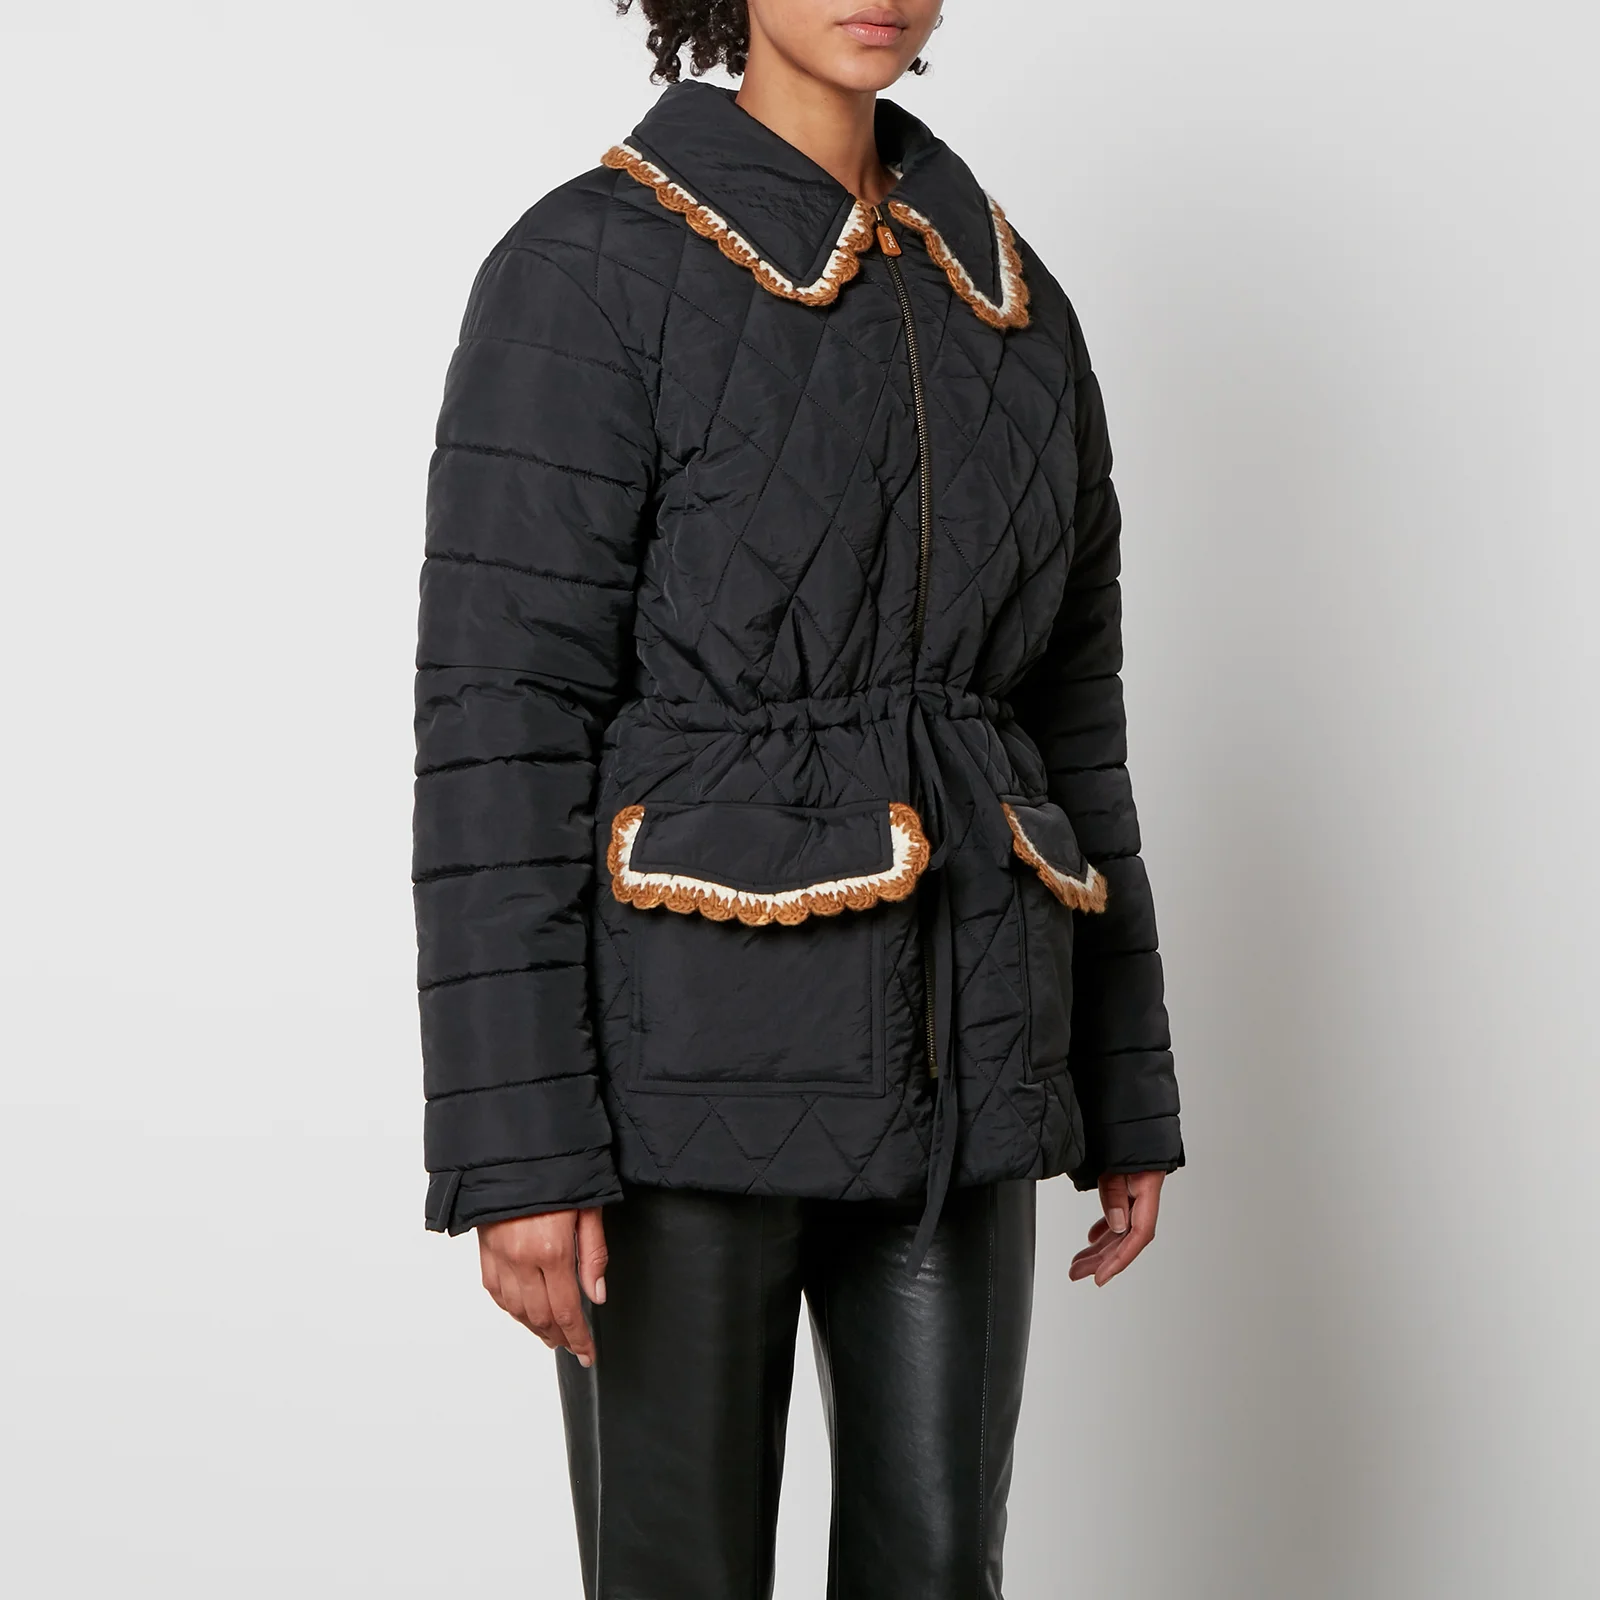 Tach Women's Blossom Quilted Jacket - Black - S Image 1